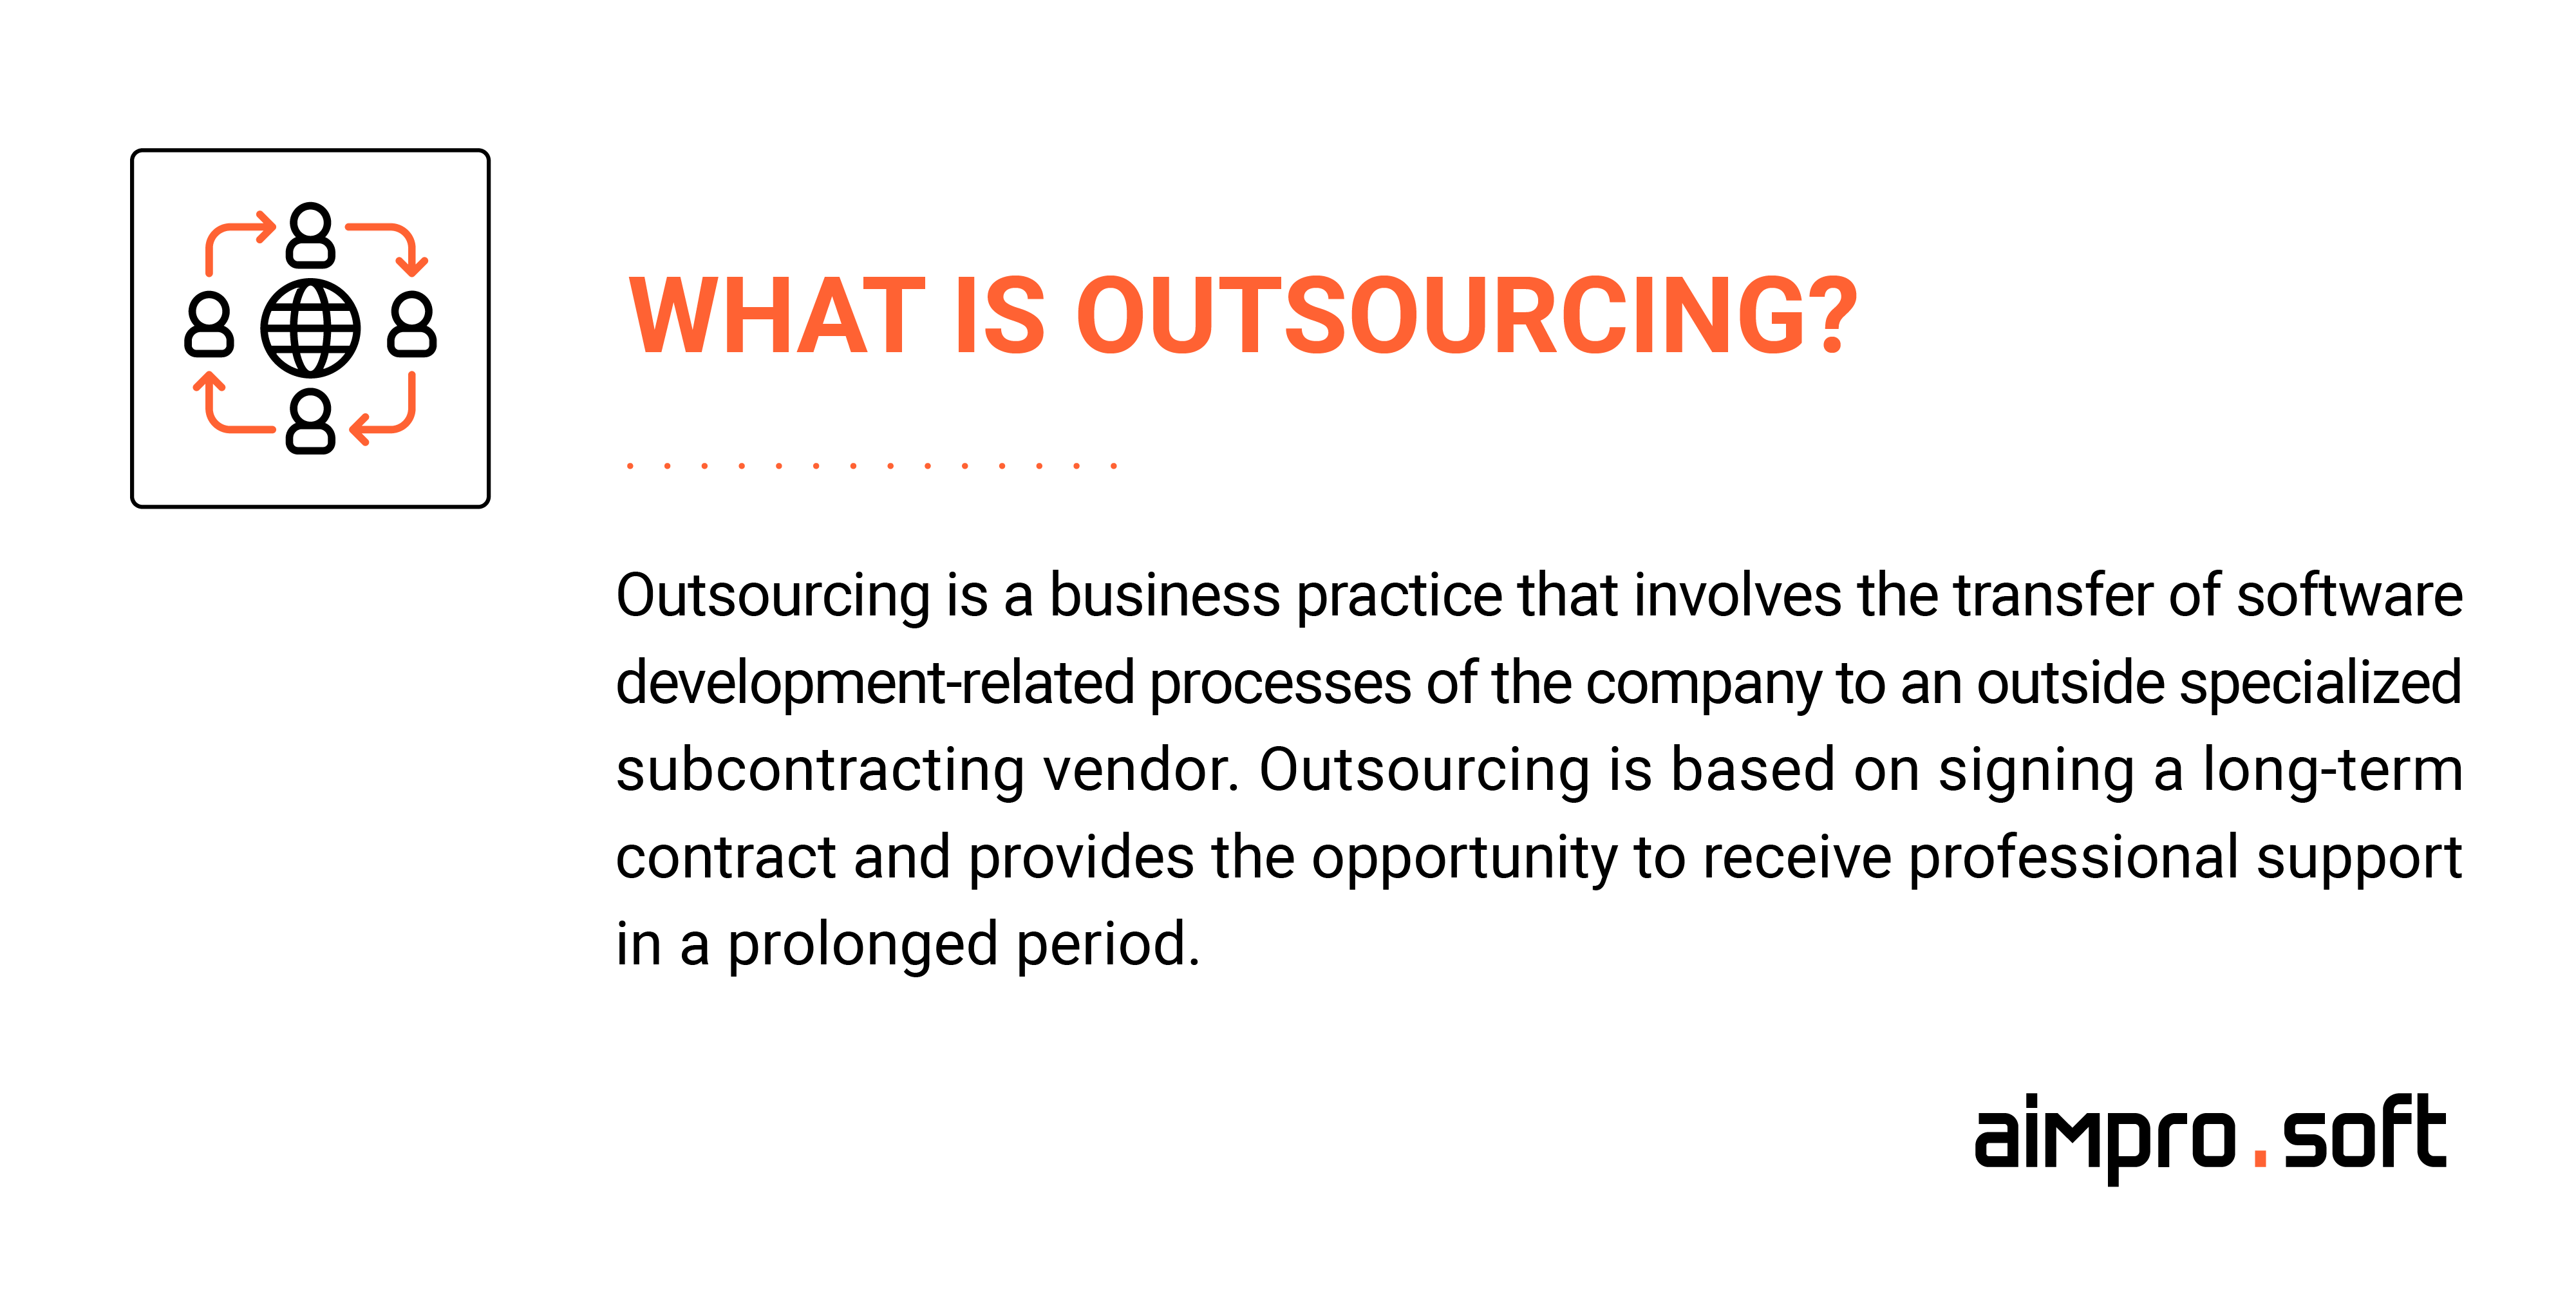 So what is outsourcing?